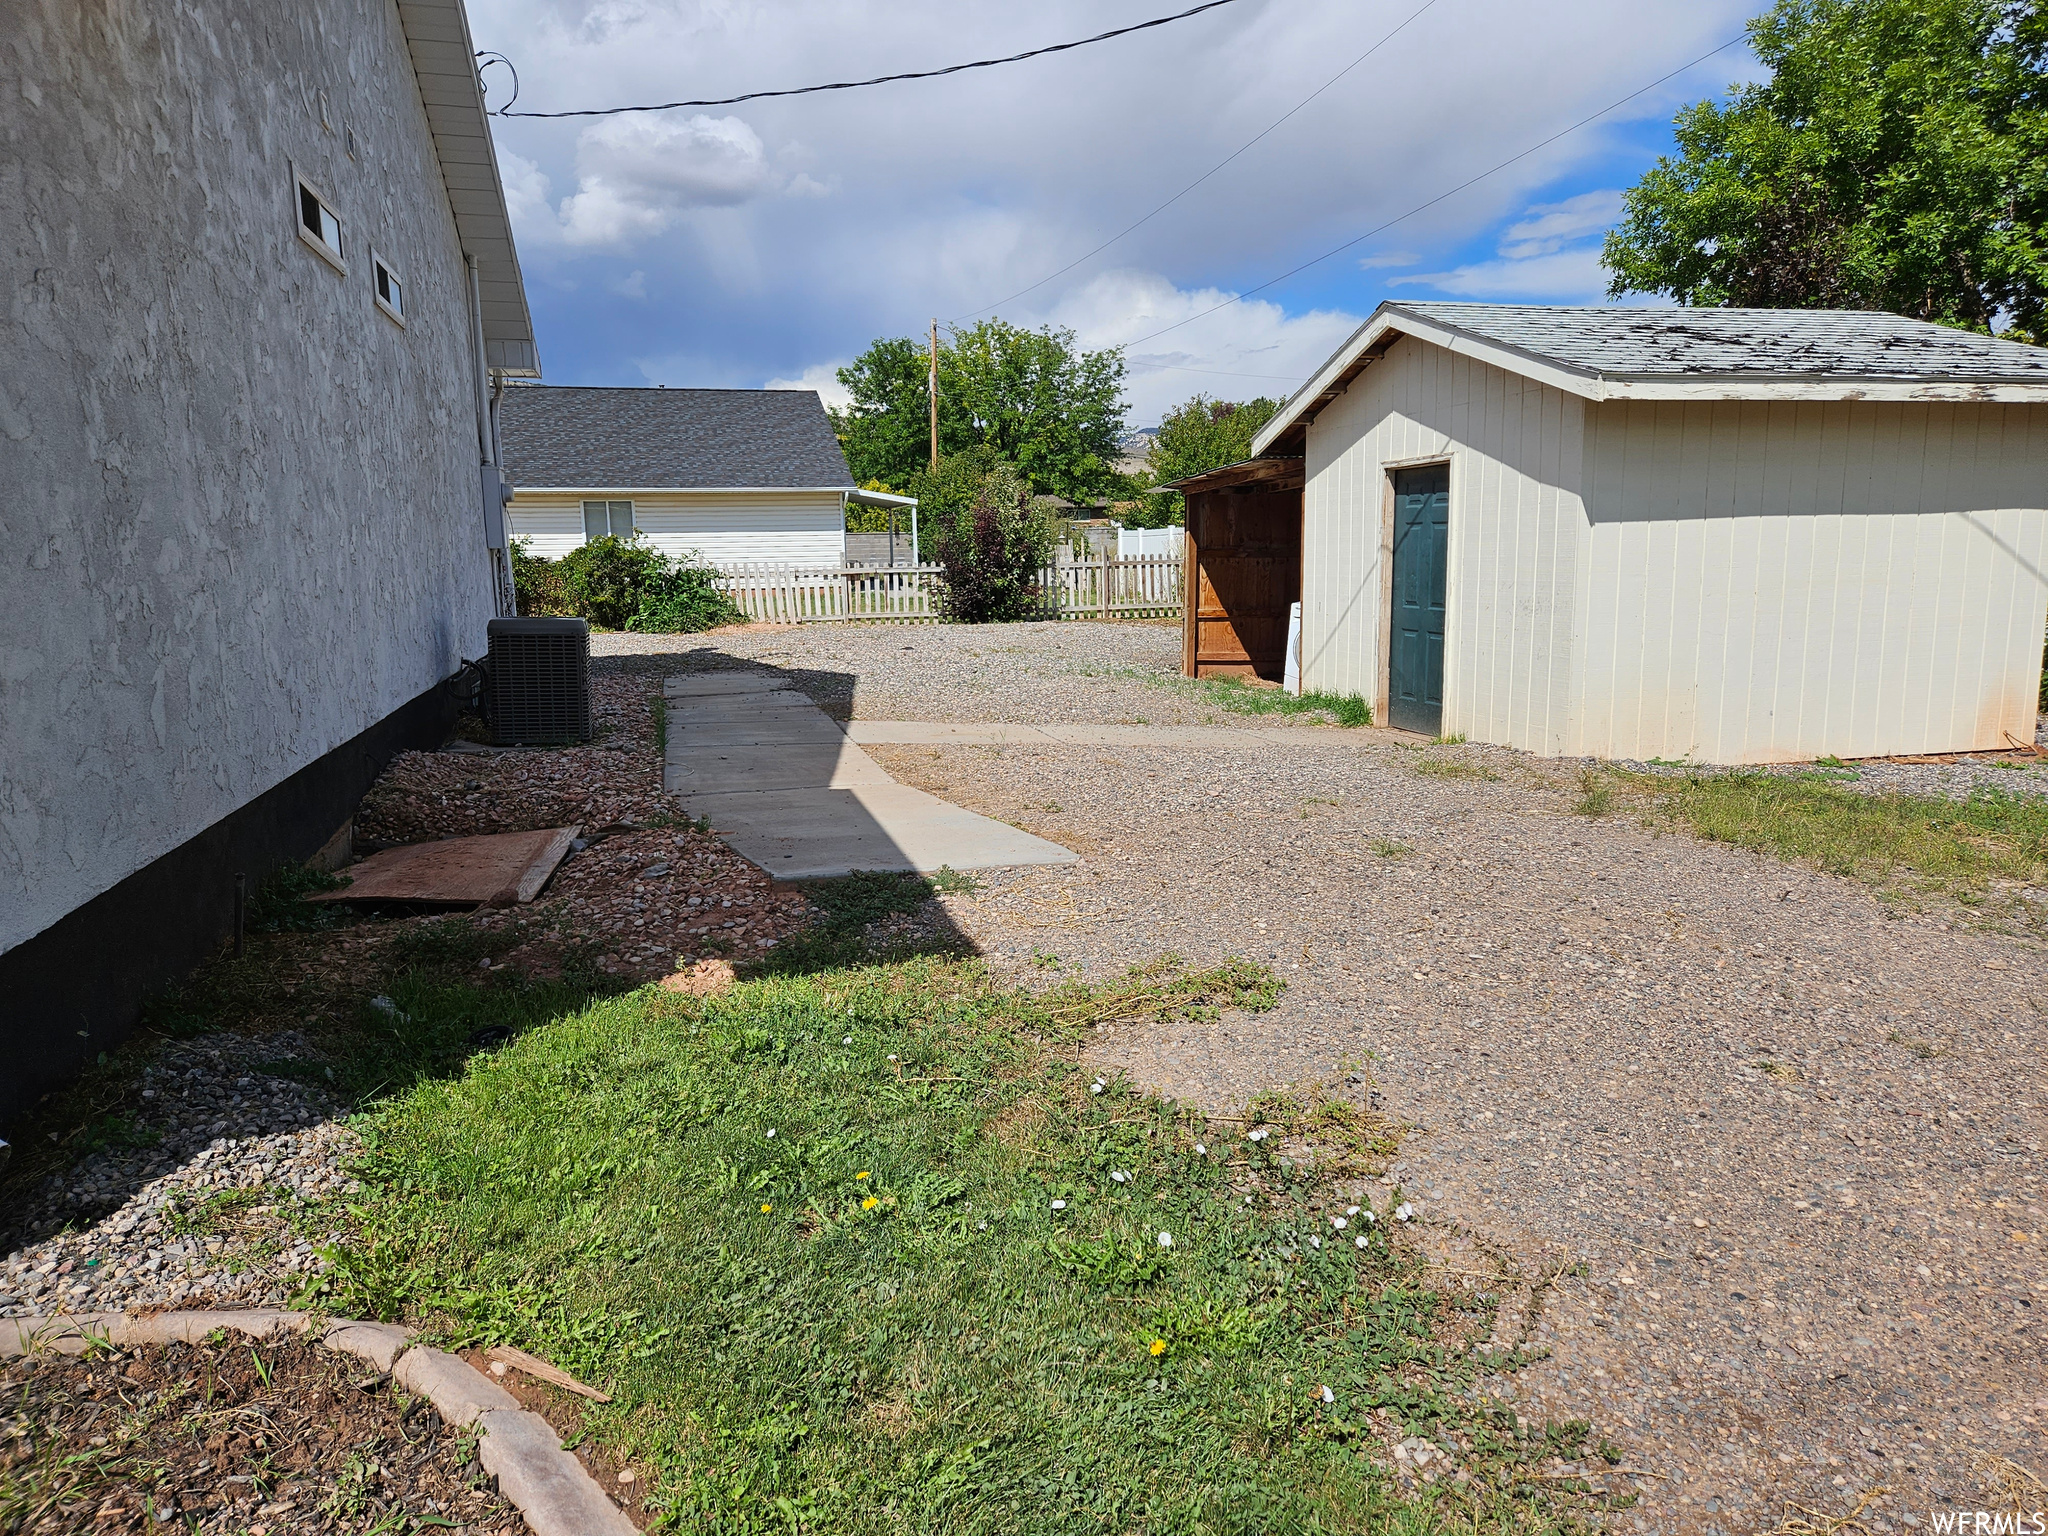 East side driveway and storage shed